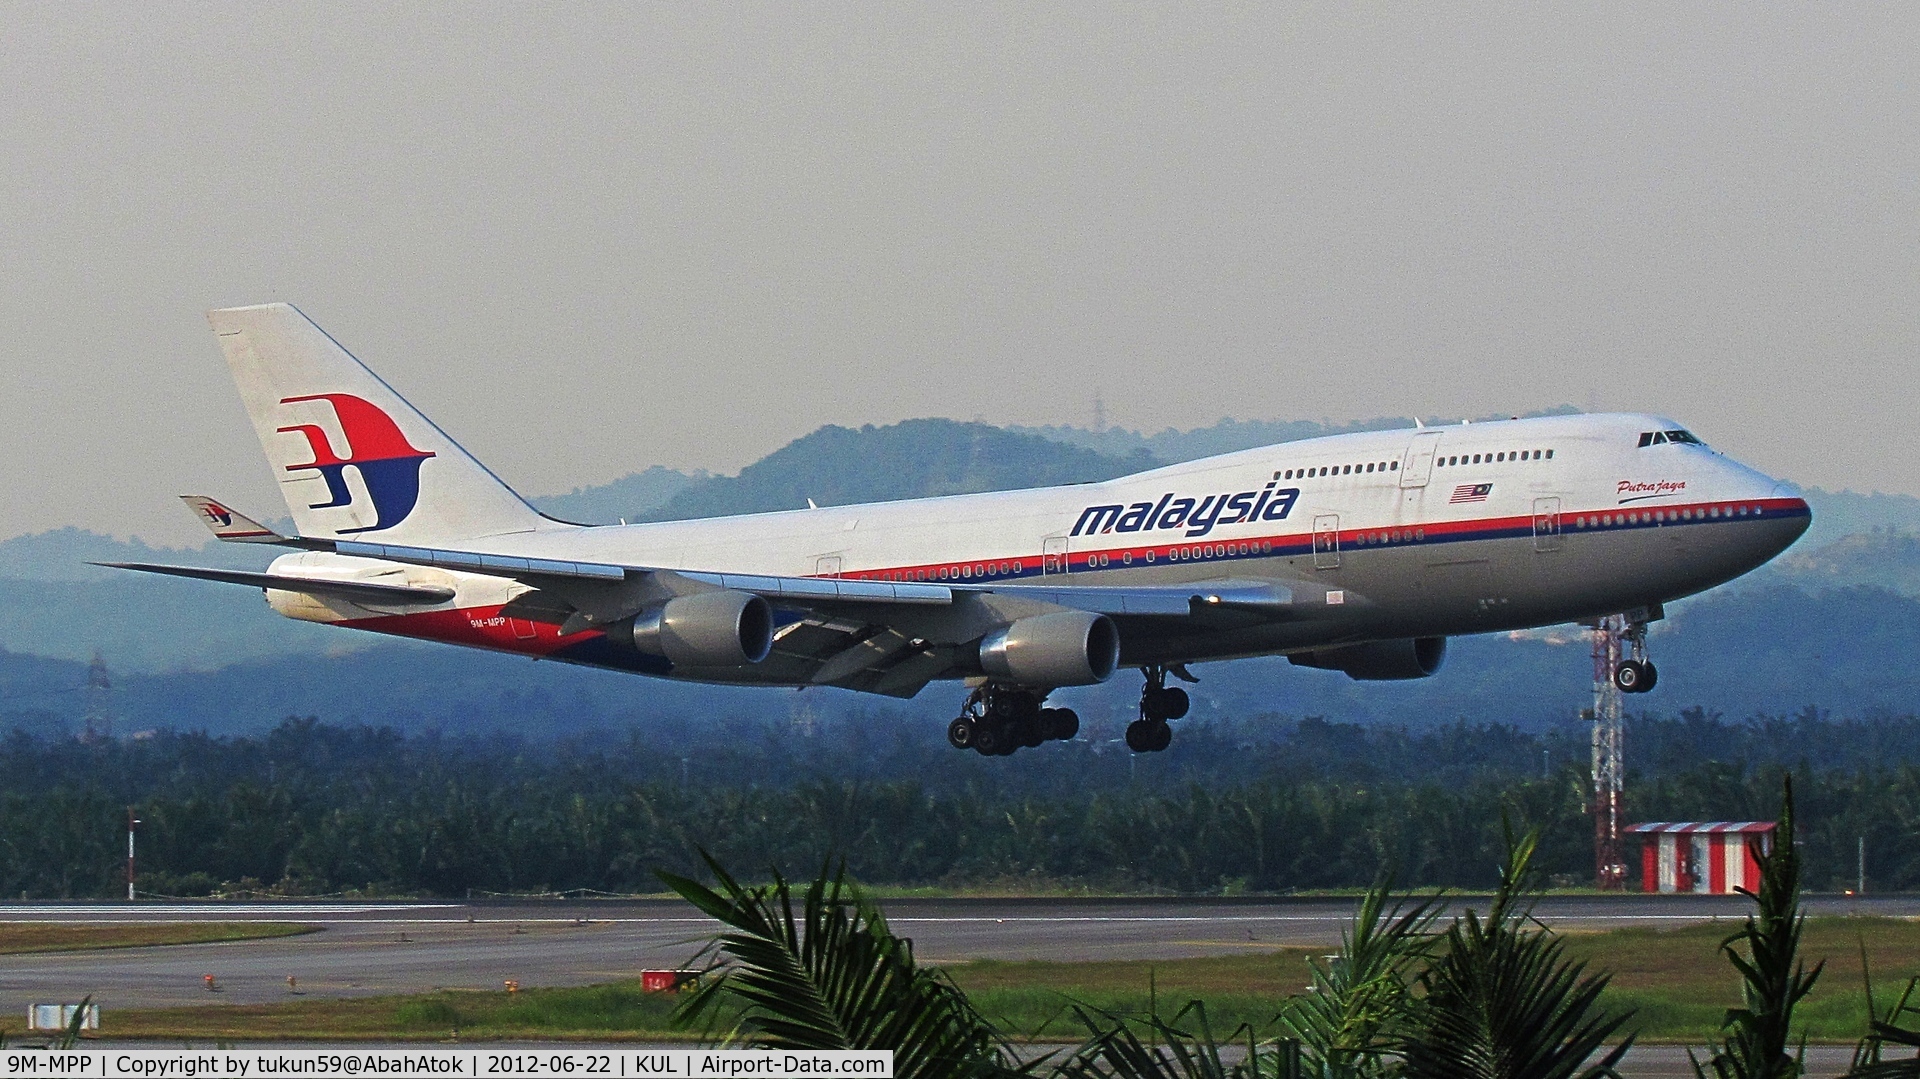 9M-MPP, 2002 Boeing 747-4H6 C/N 29900, Malaysia Airlines